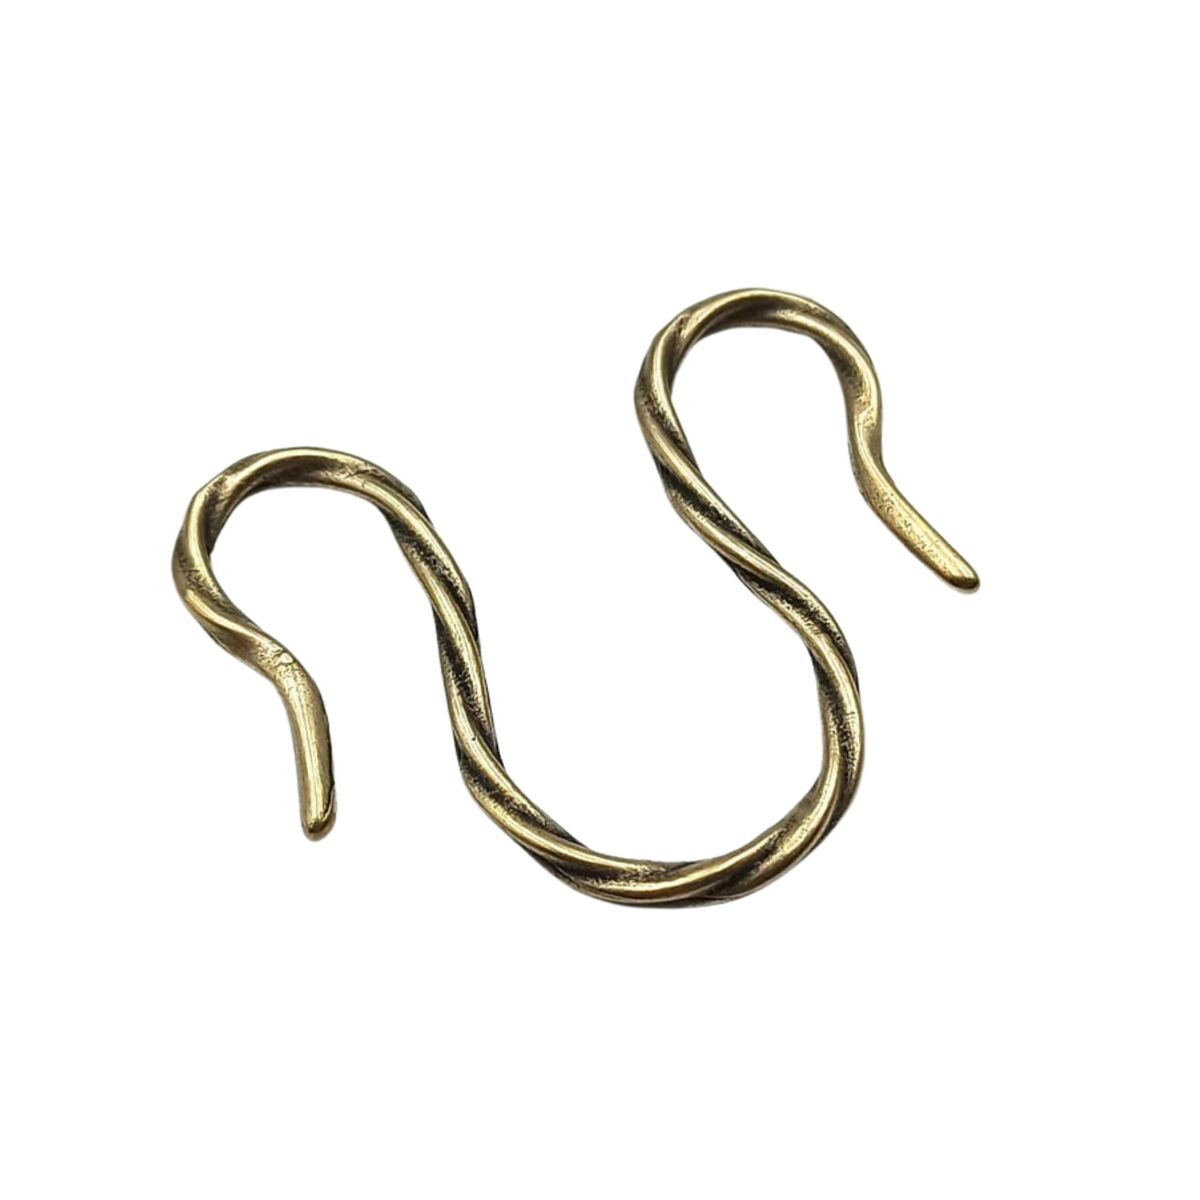 Omega type clasp from bronze